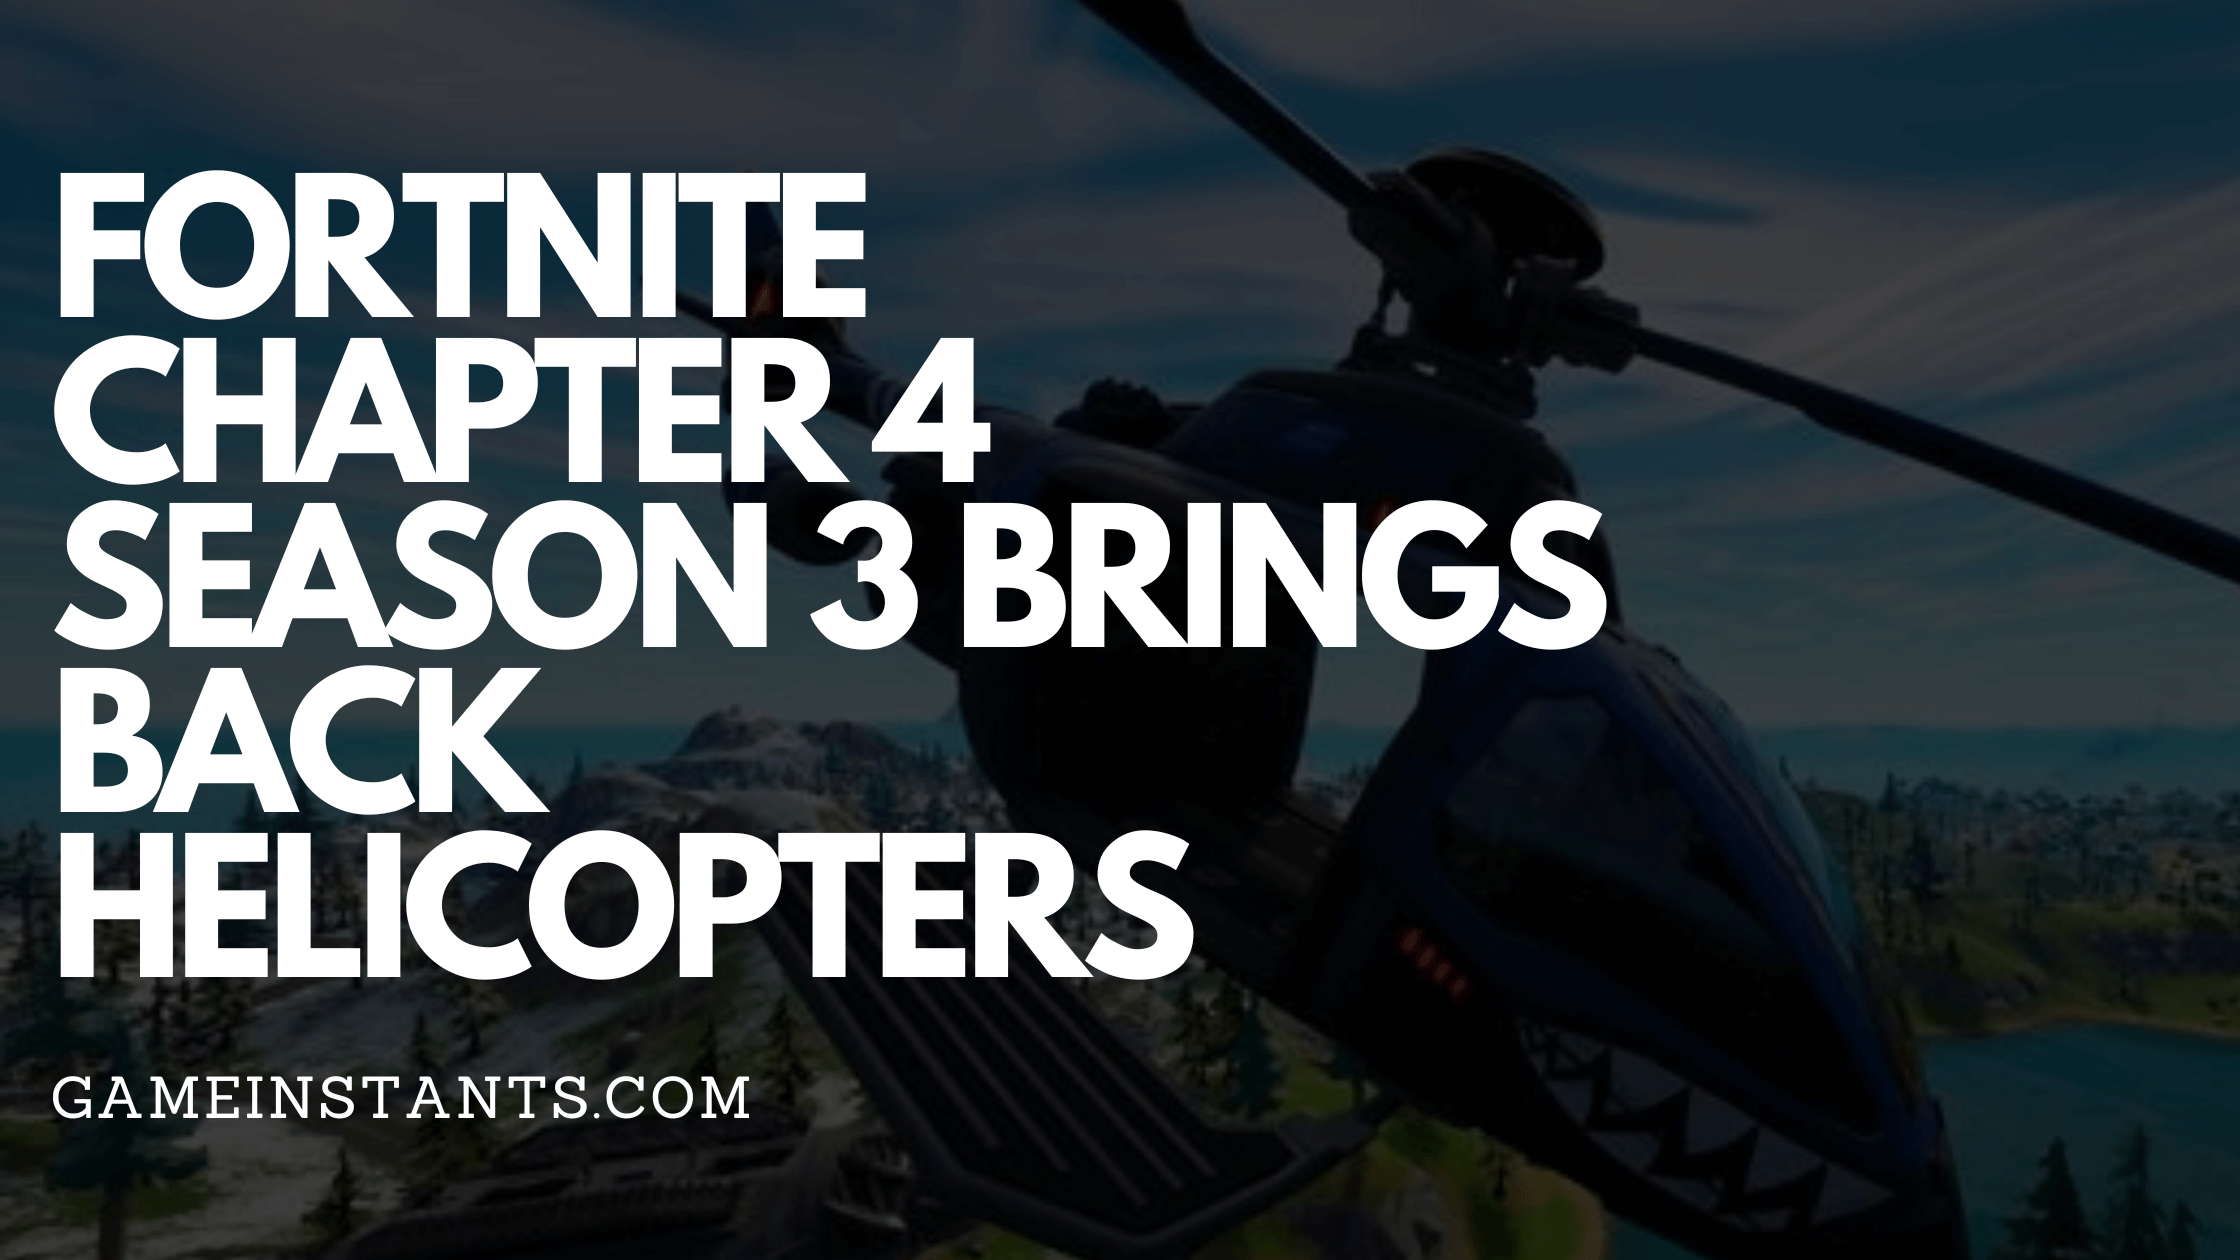 Fortnite Chapter 4 Season 3 Brings Back Helicopters